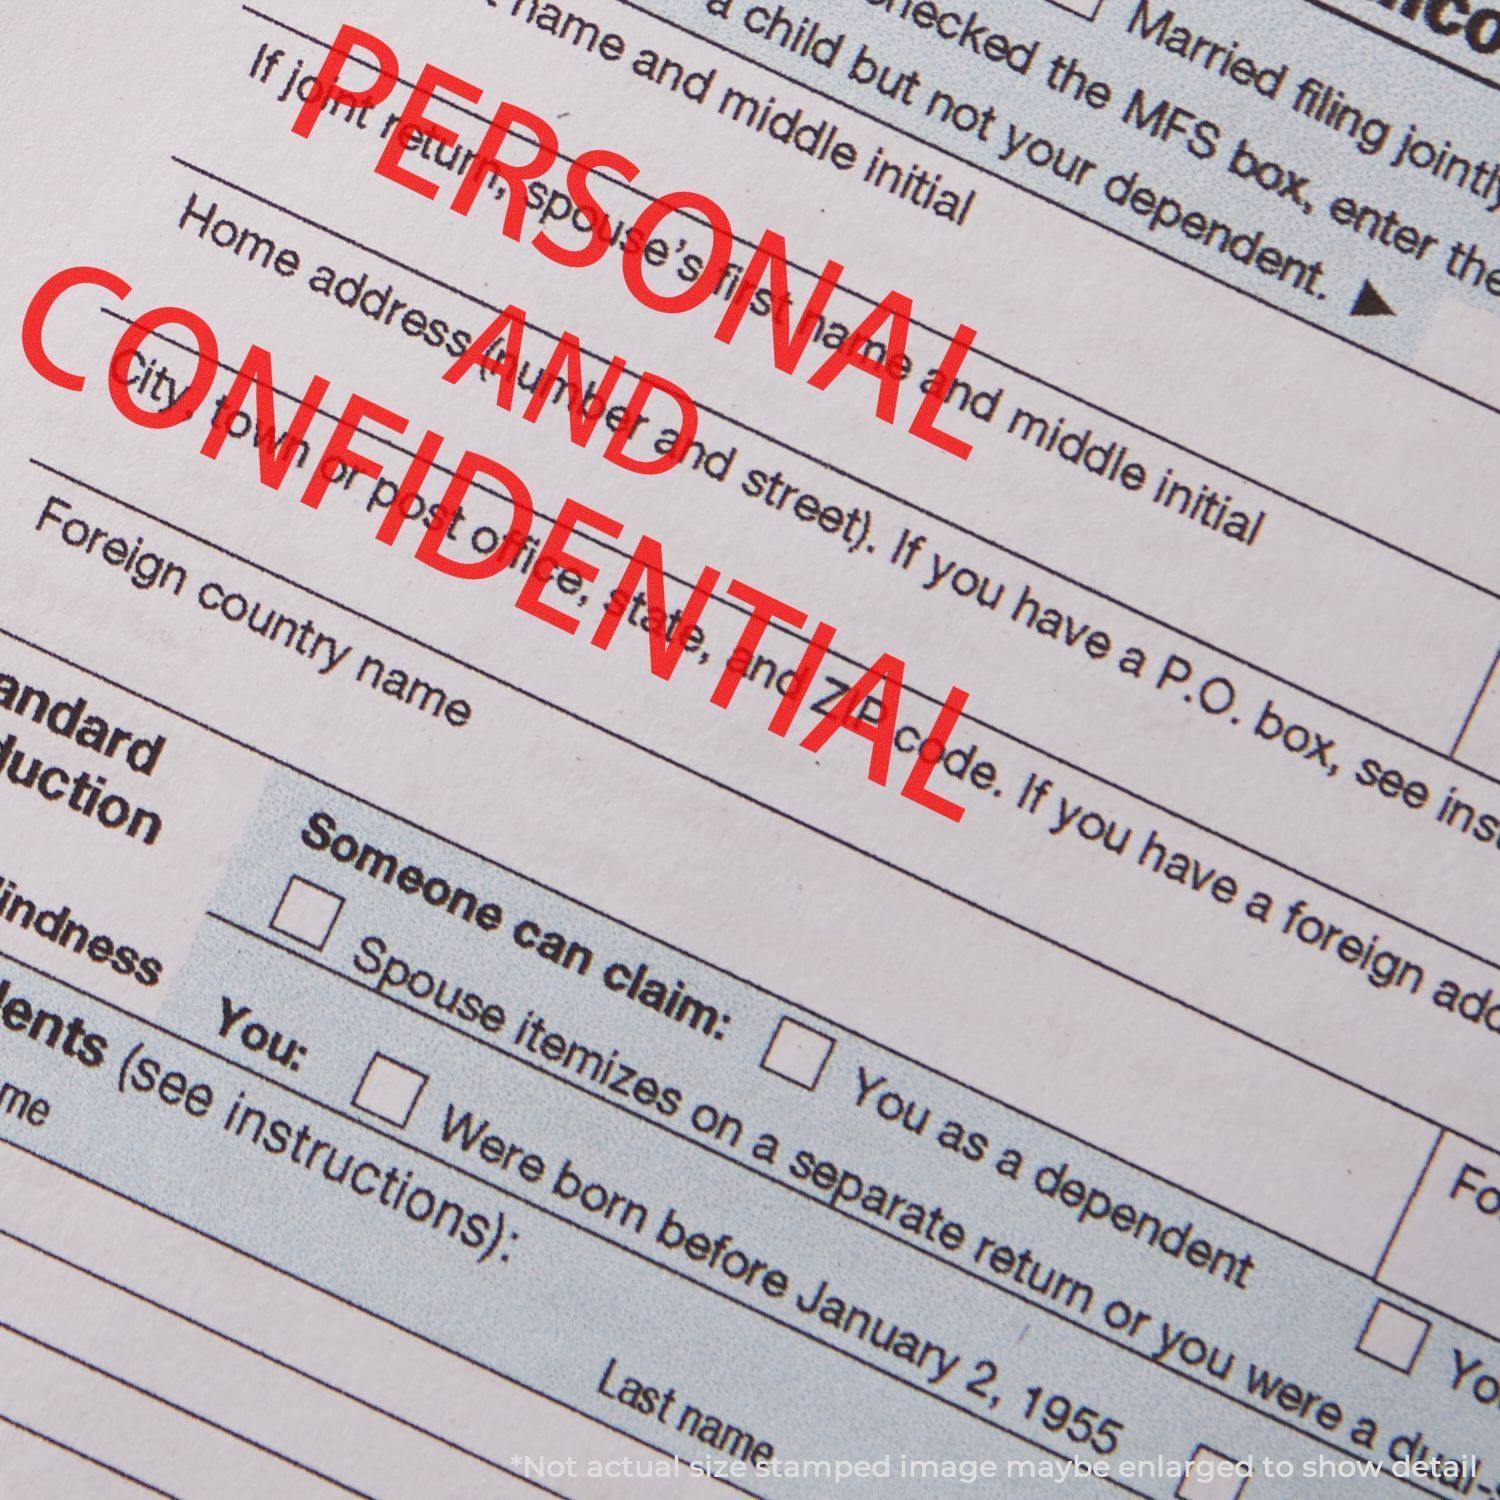 Large Pre Inked Personal Confidential Stamp Main Image